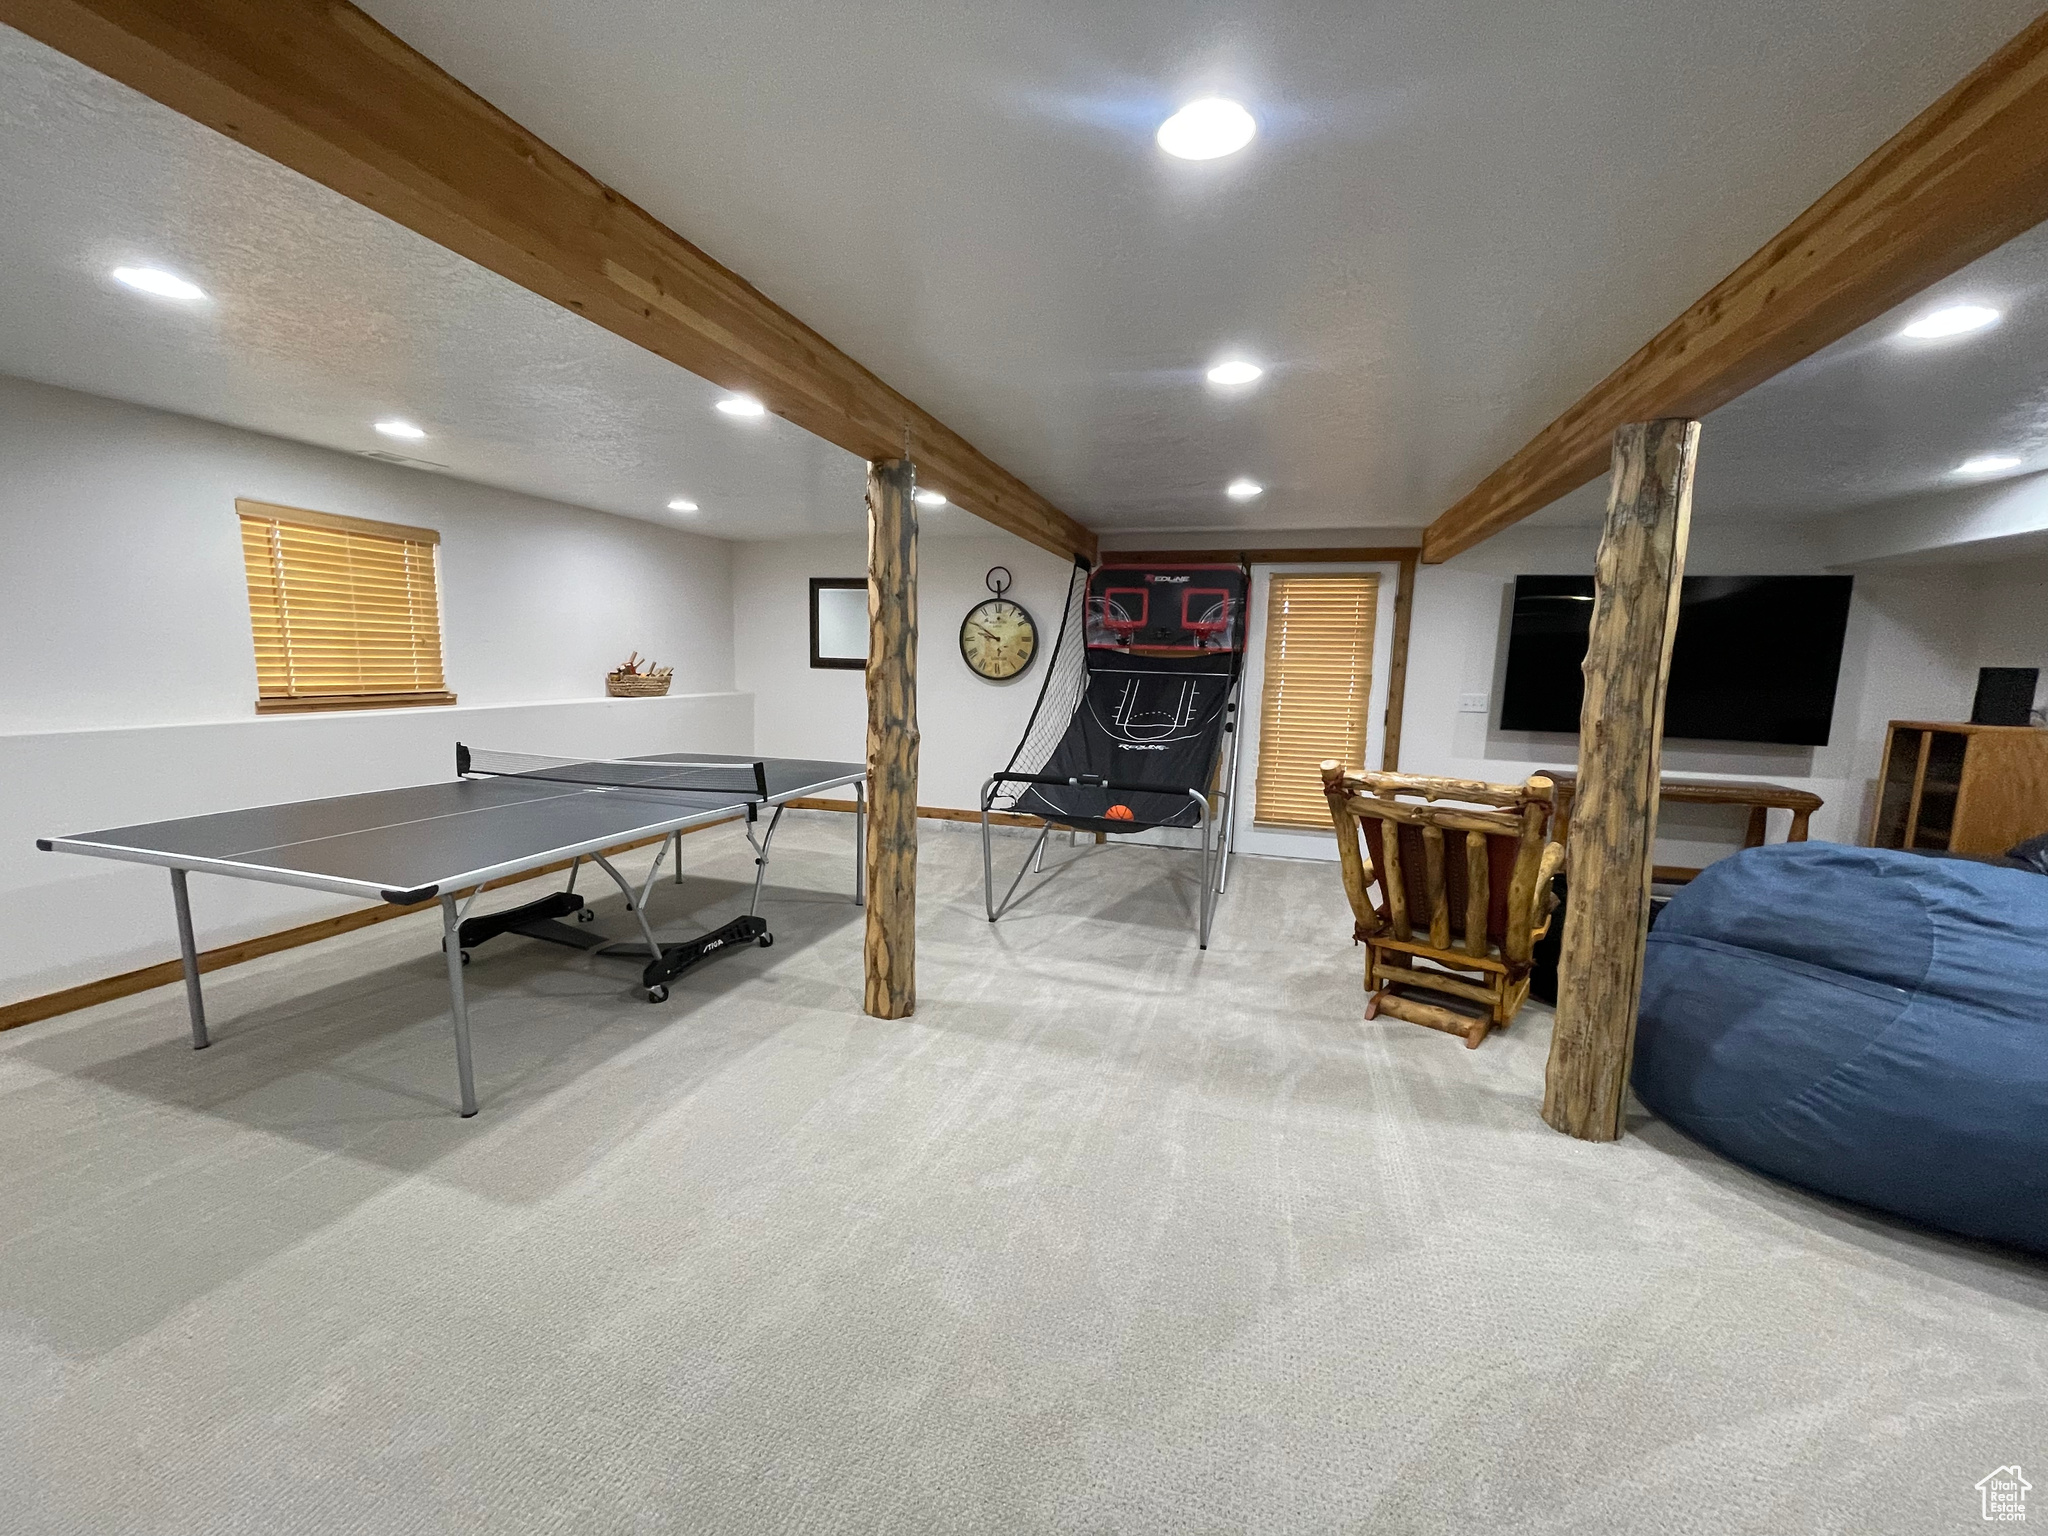 Recreation room featuring a textured ceiling, beamed ceiling, and light colored carpet